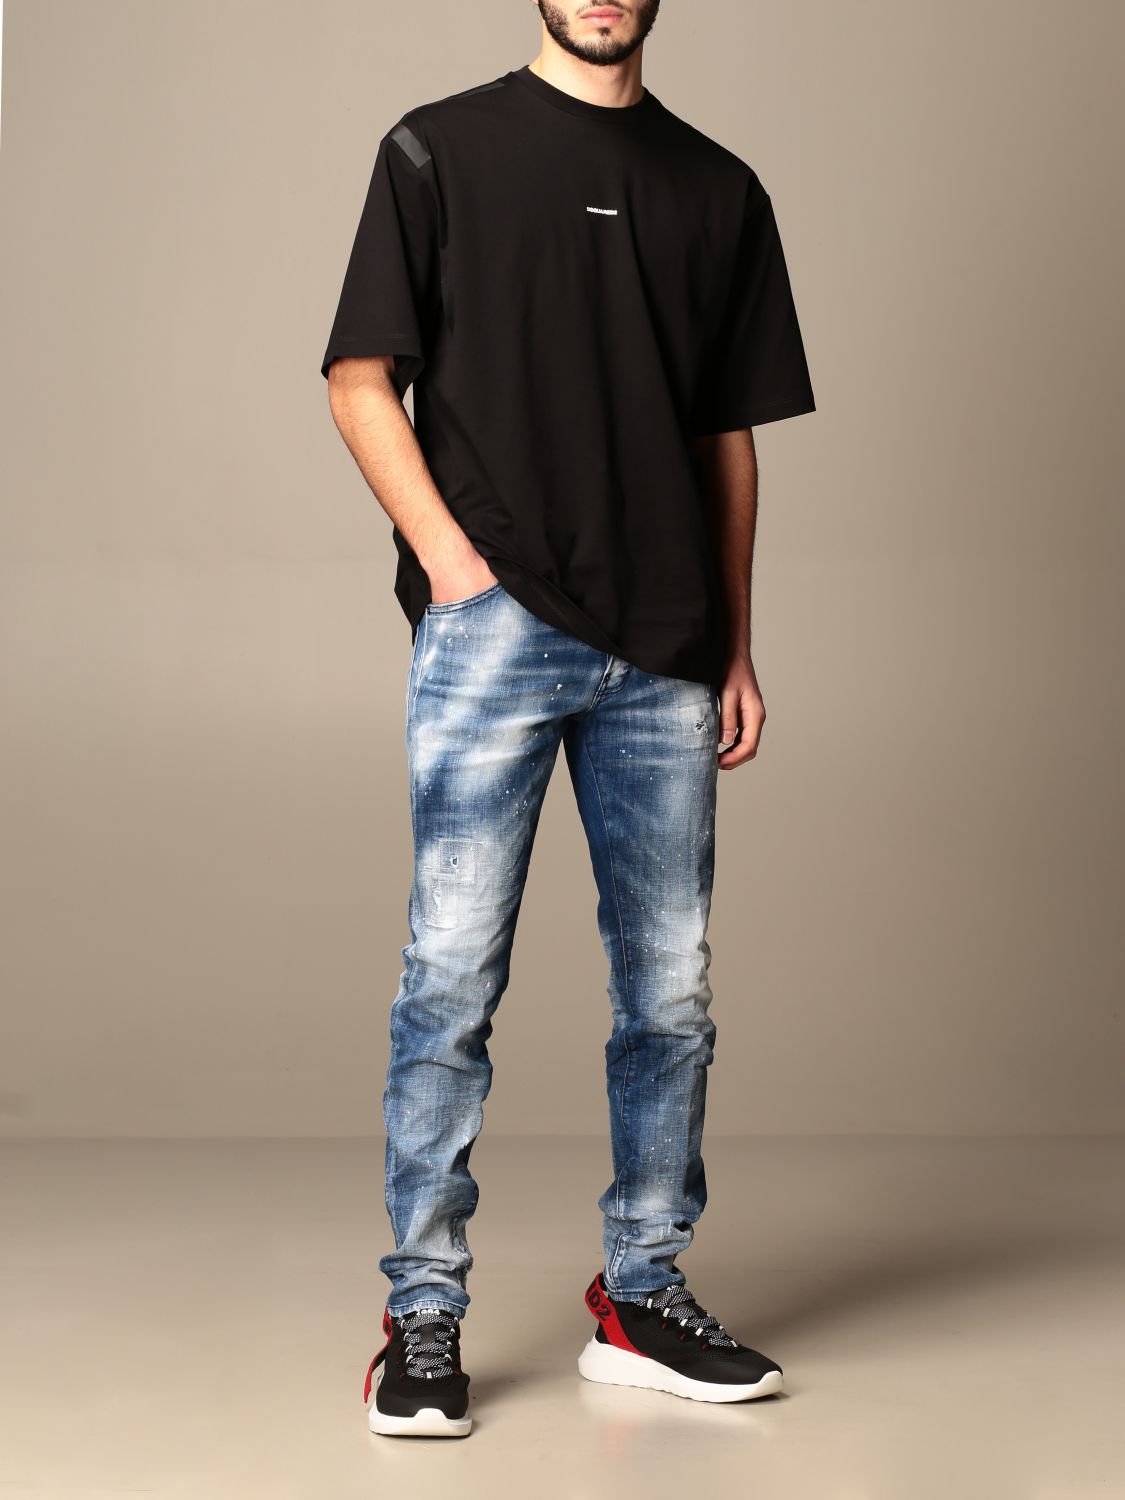 DSQUARED2: Cool Guy 5-pocket jeans in used denim with rips - Denim ...